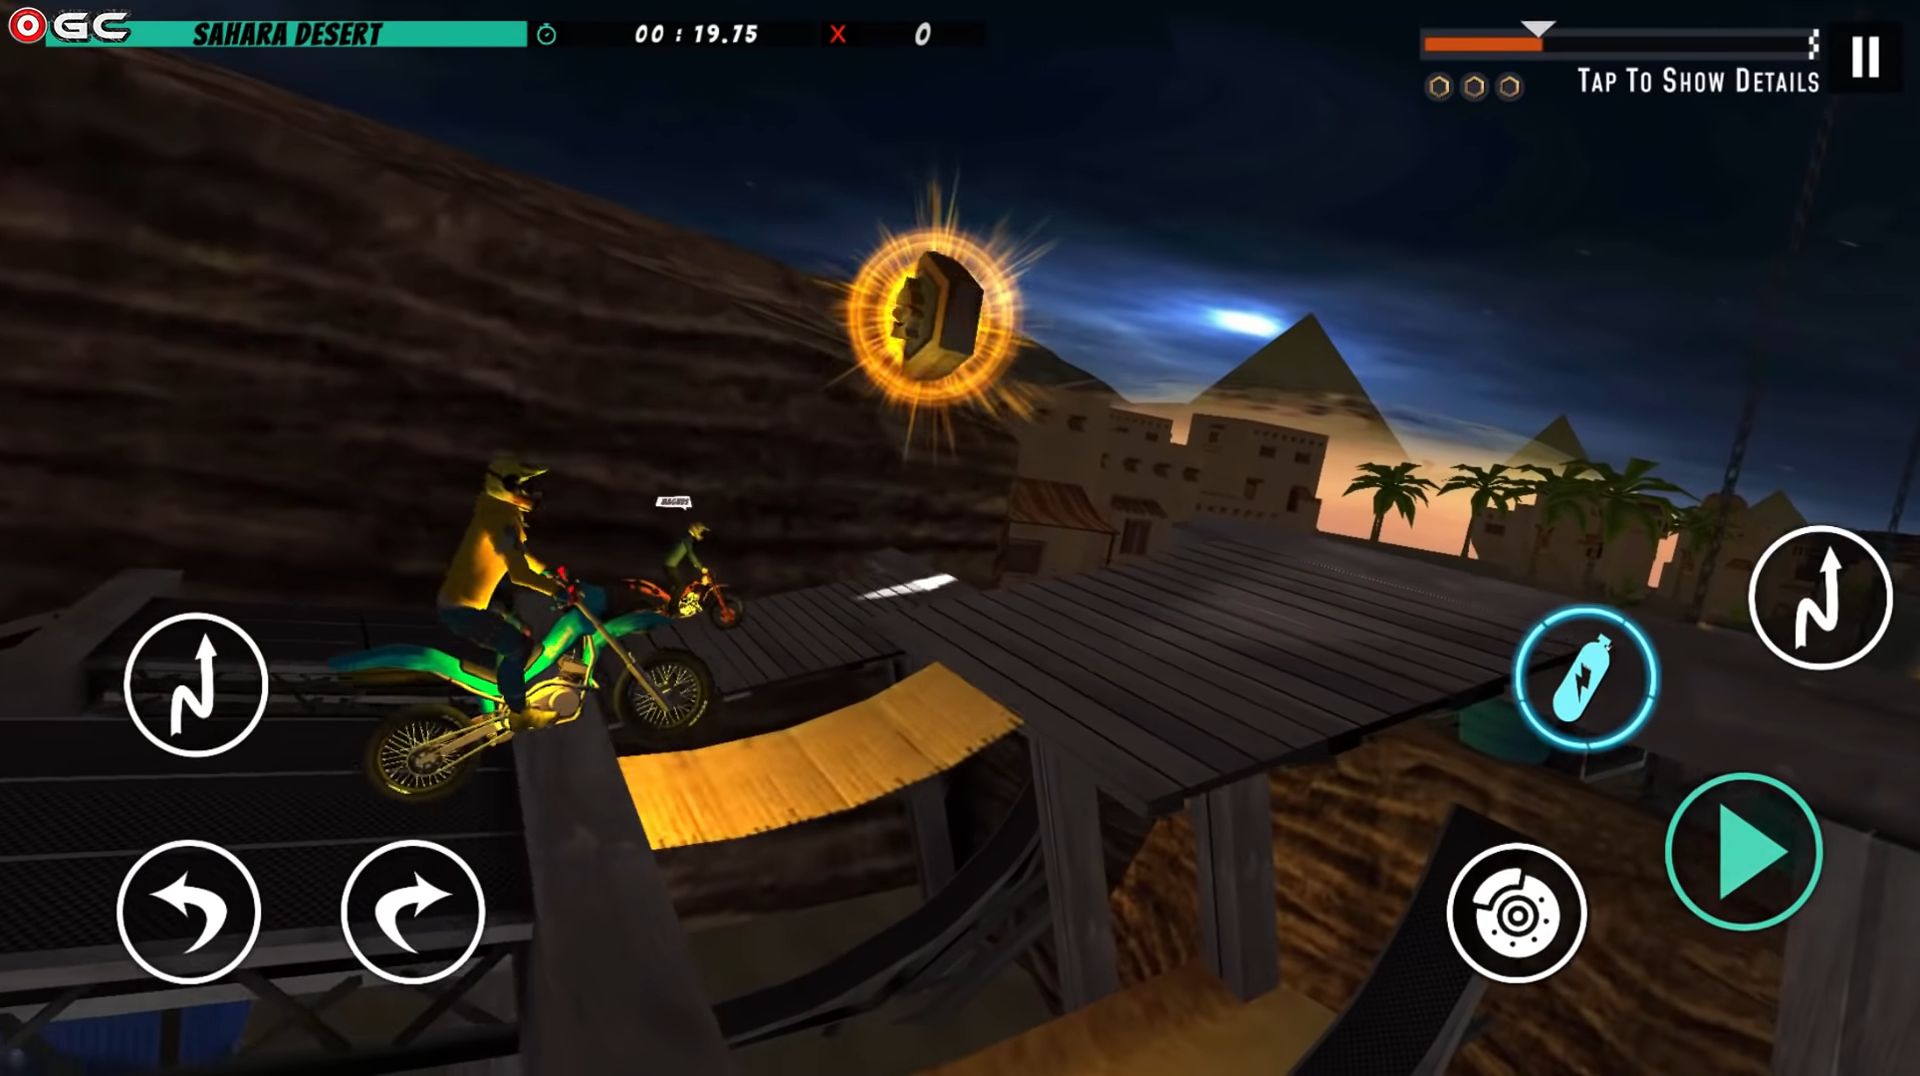 Bike Stunt 2 New Motorcycle Game - New Games 2020 for Android